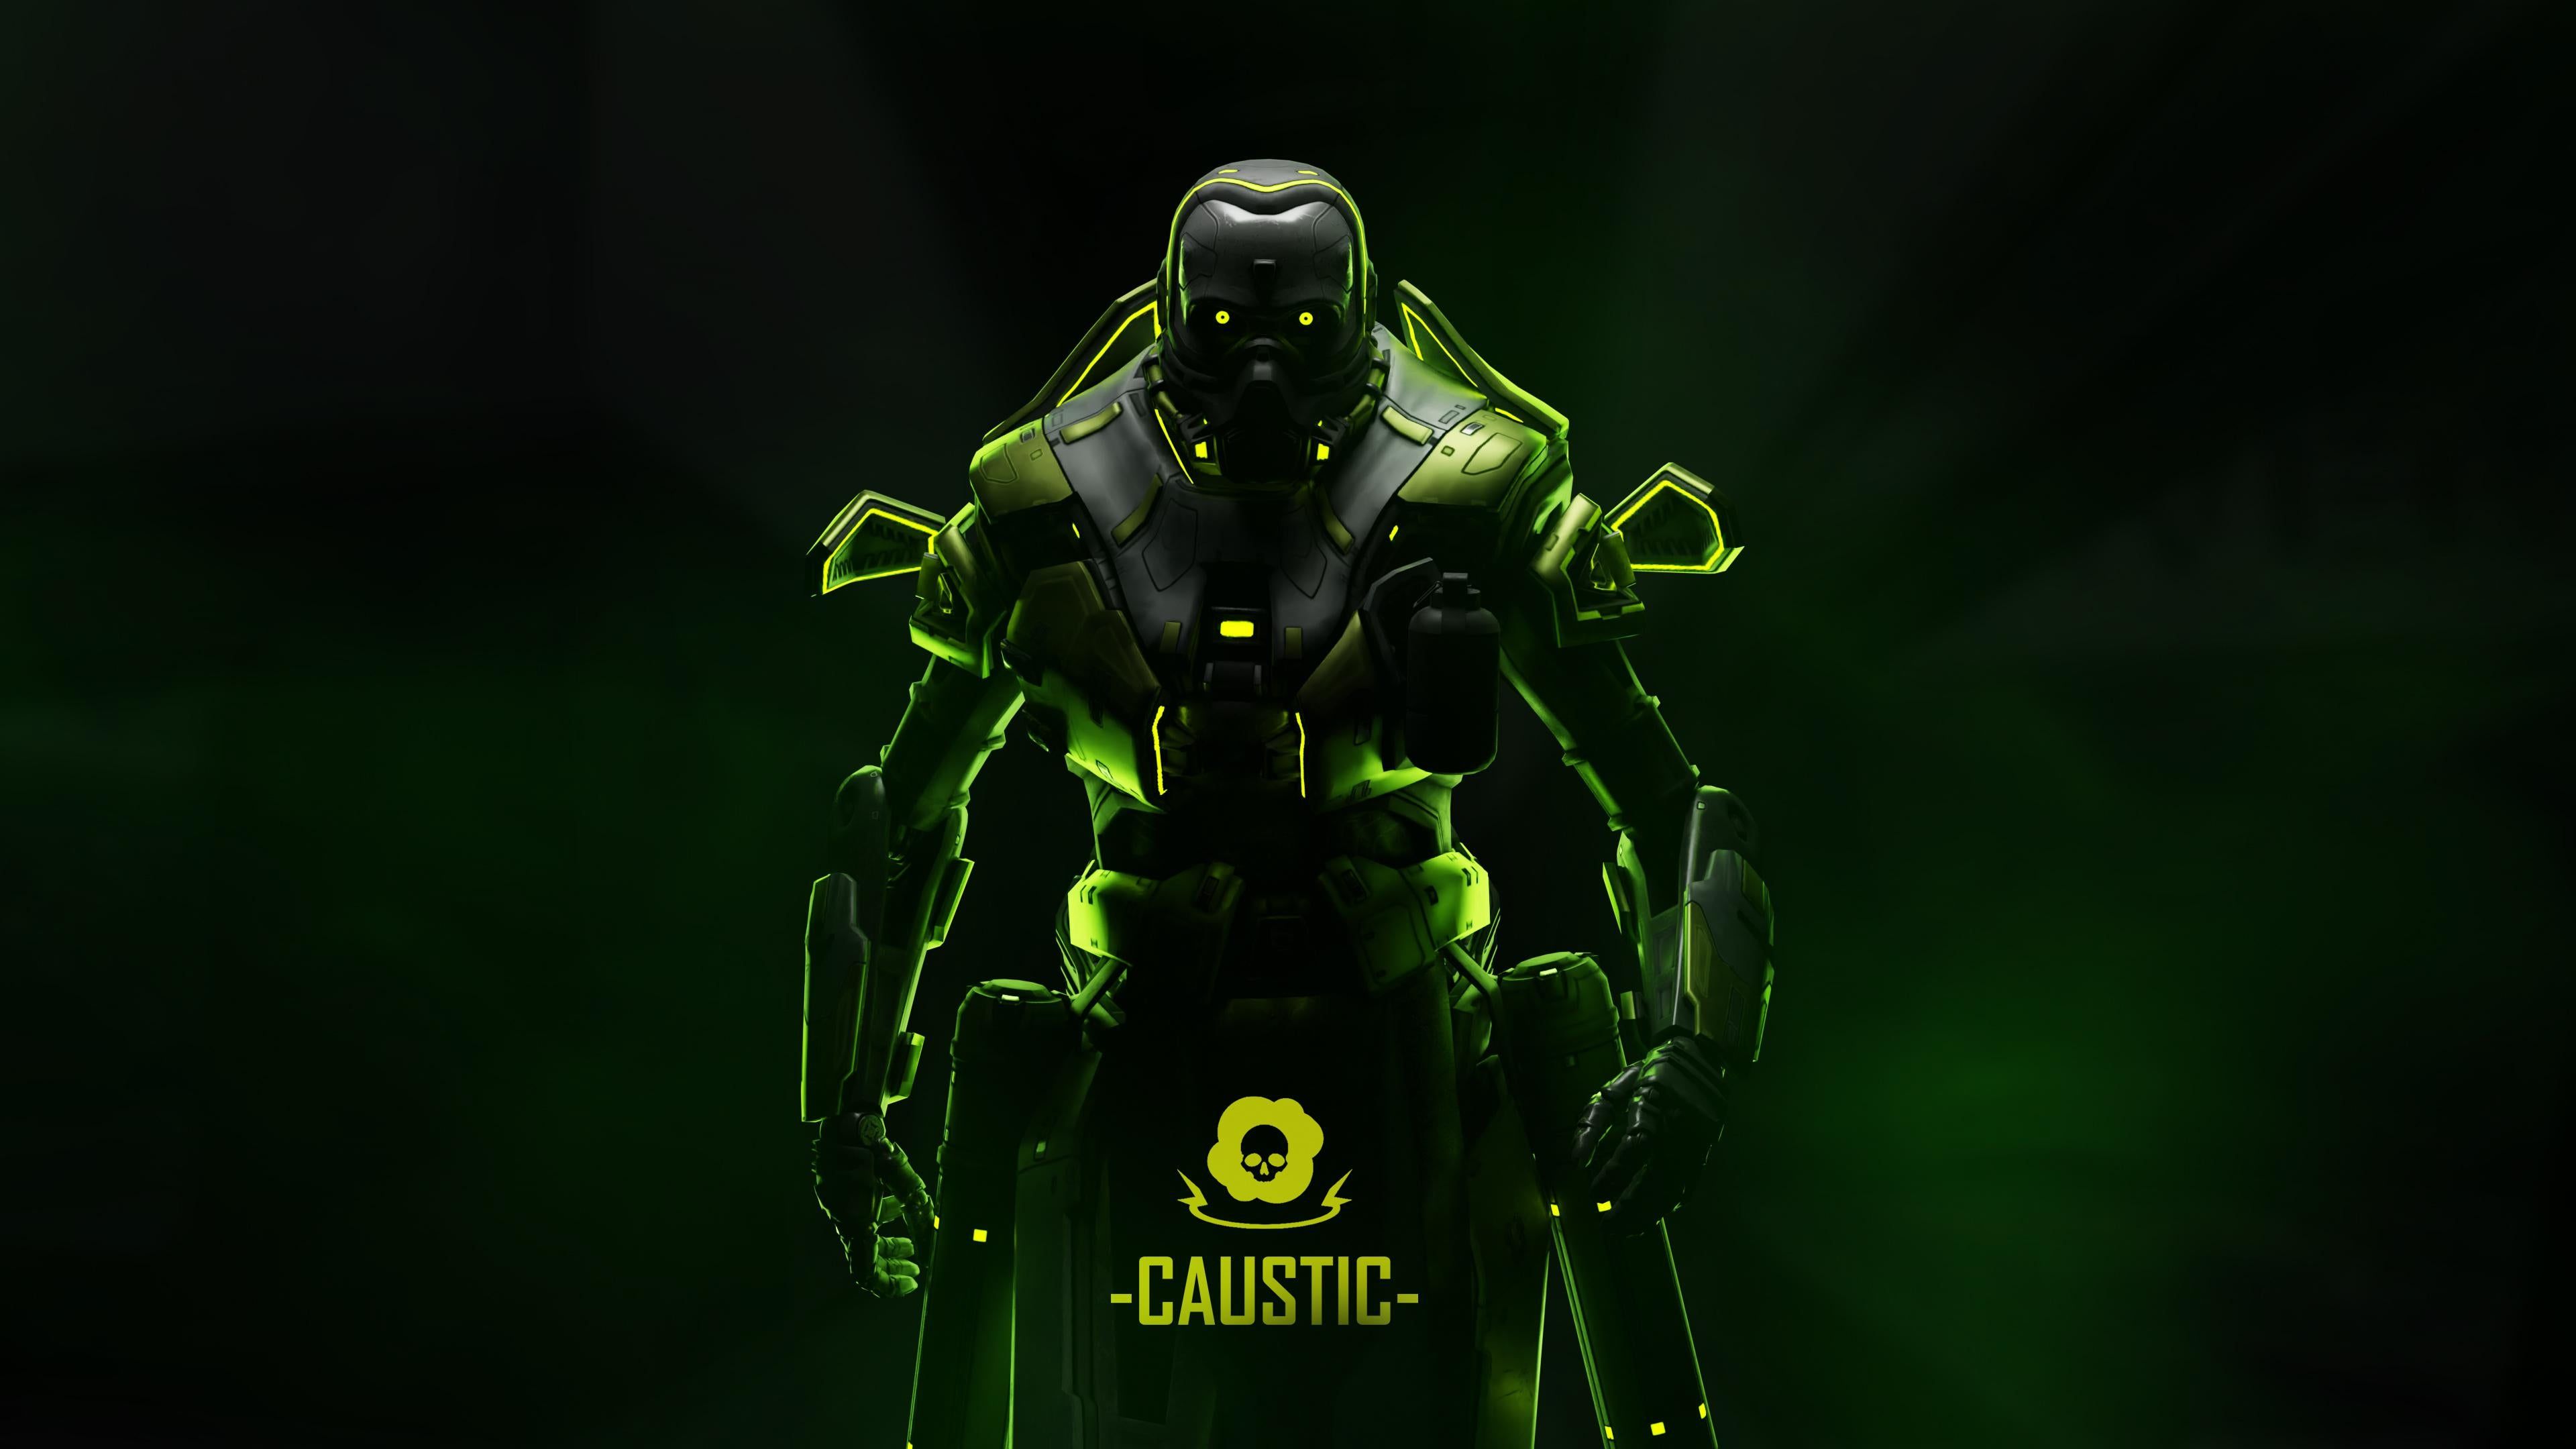 Caustic 4K Wallpaper. A lot you requested for other skins but, I thought this skin best suits the mood I was going for. Enjoy!!